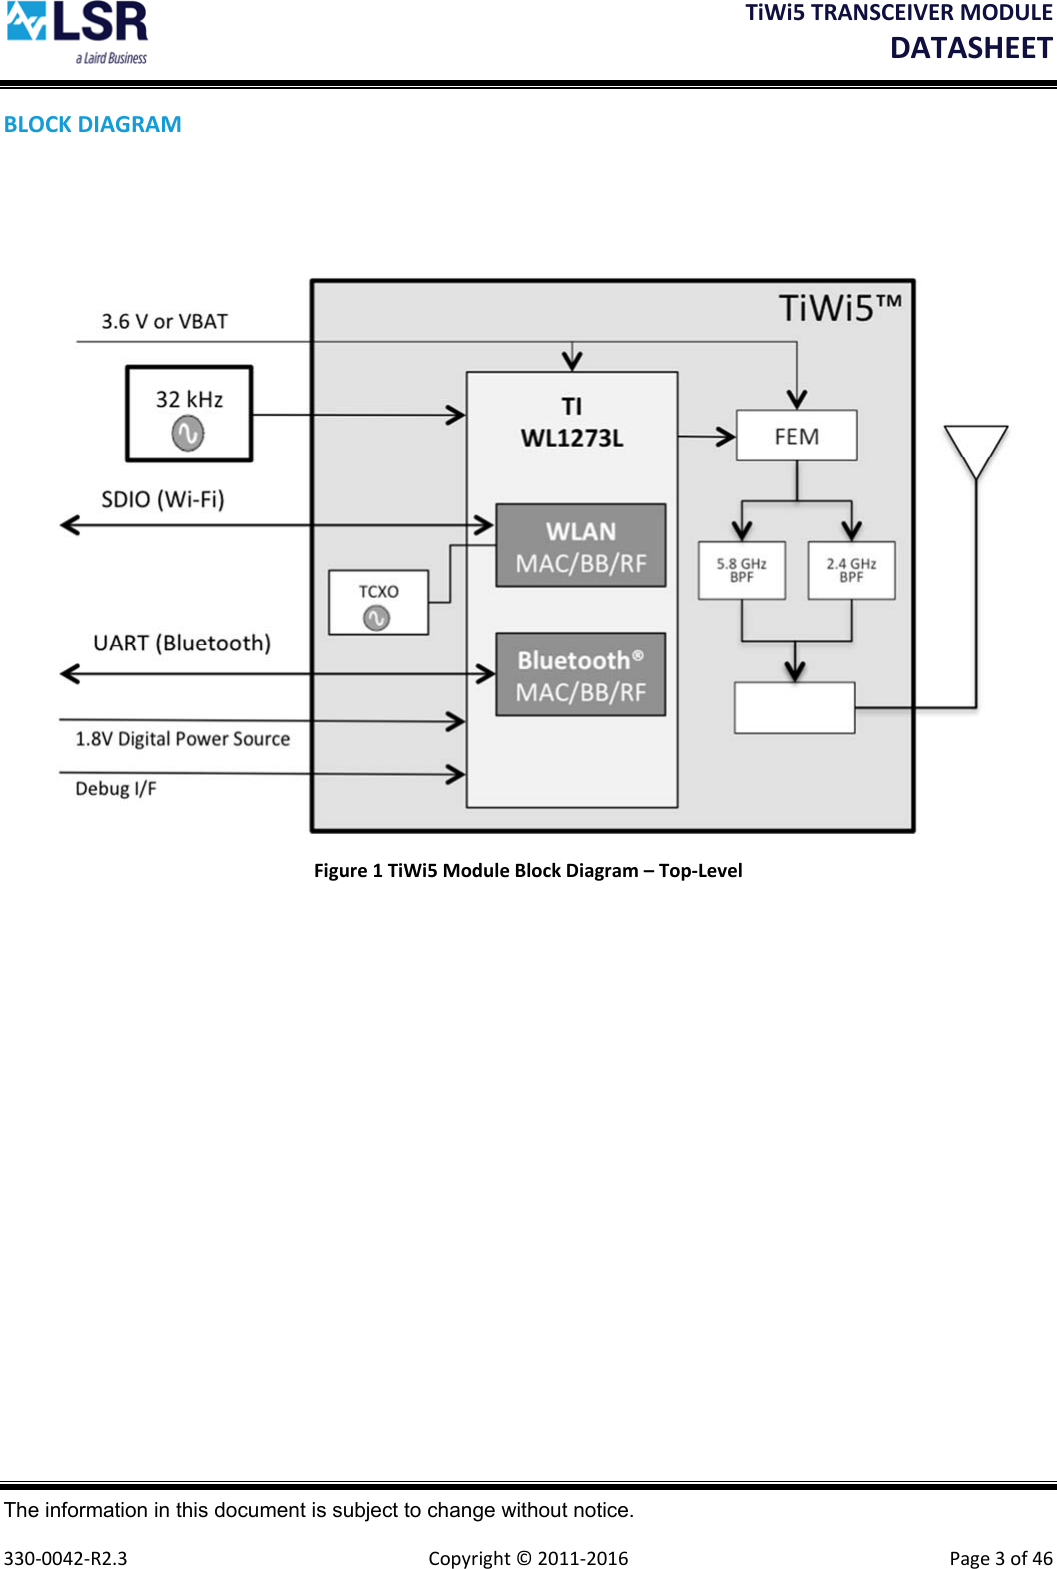 TiWi5TRANSCEIVERMODULEDATASHEET The information in this document is subject to change without notice.  330‐0042‐R2.3  Copyright©2011‐2016 Page3of46BLOCKDIAGRAMFigure1TiWi5ModuleBlockDiagram–Top‐Level